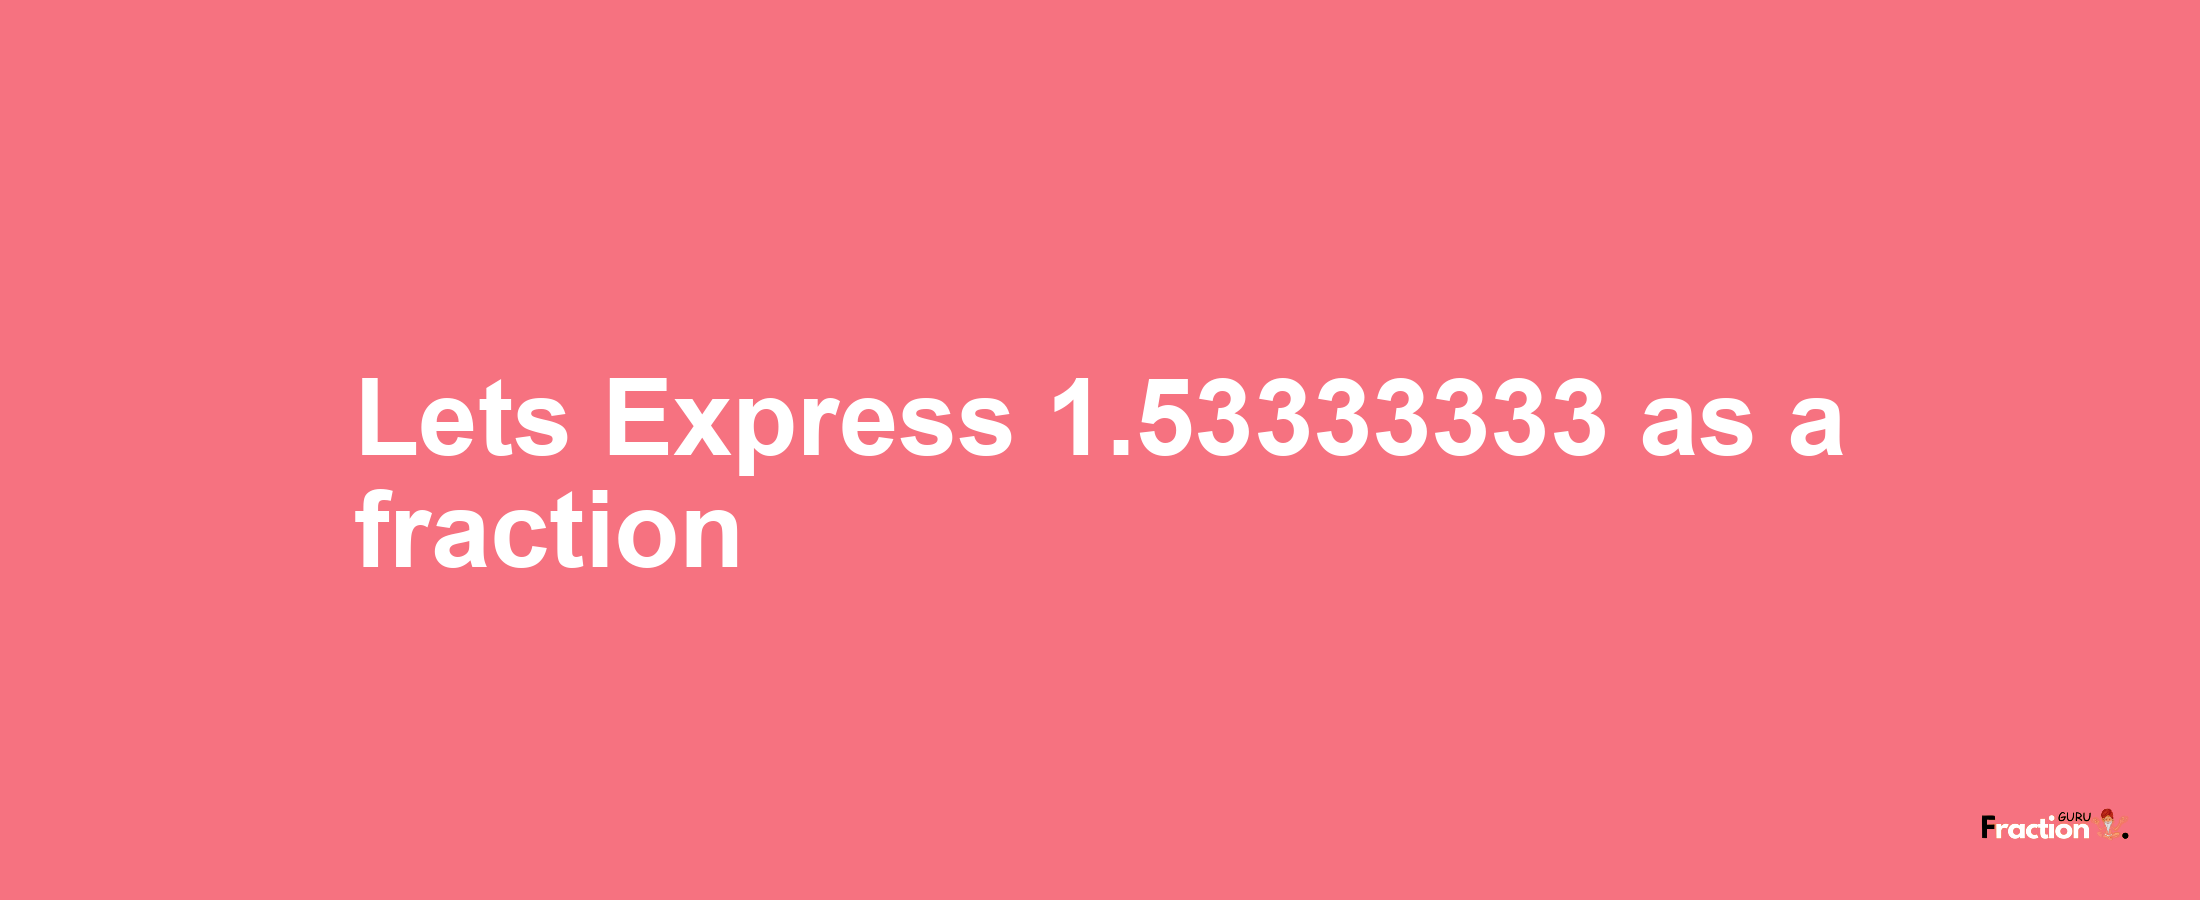 Lets Express 1.53333333 as afraction